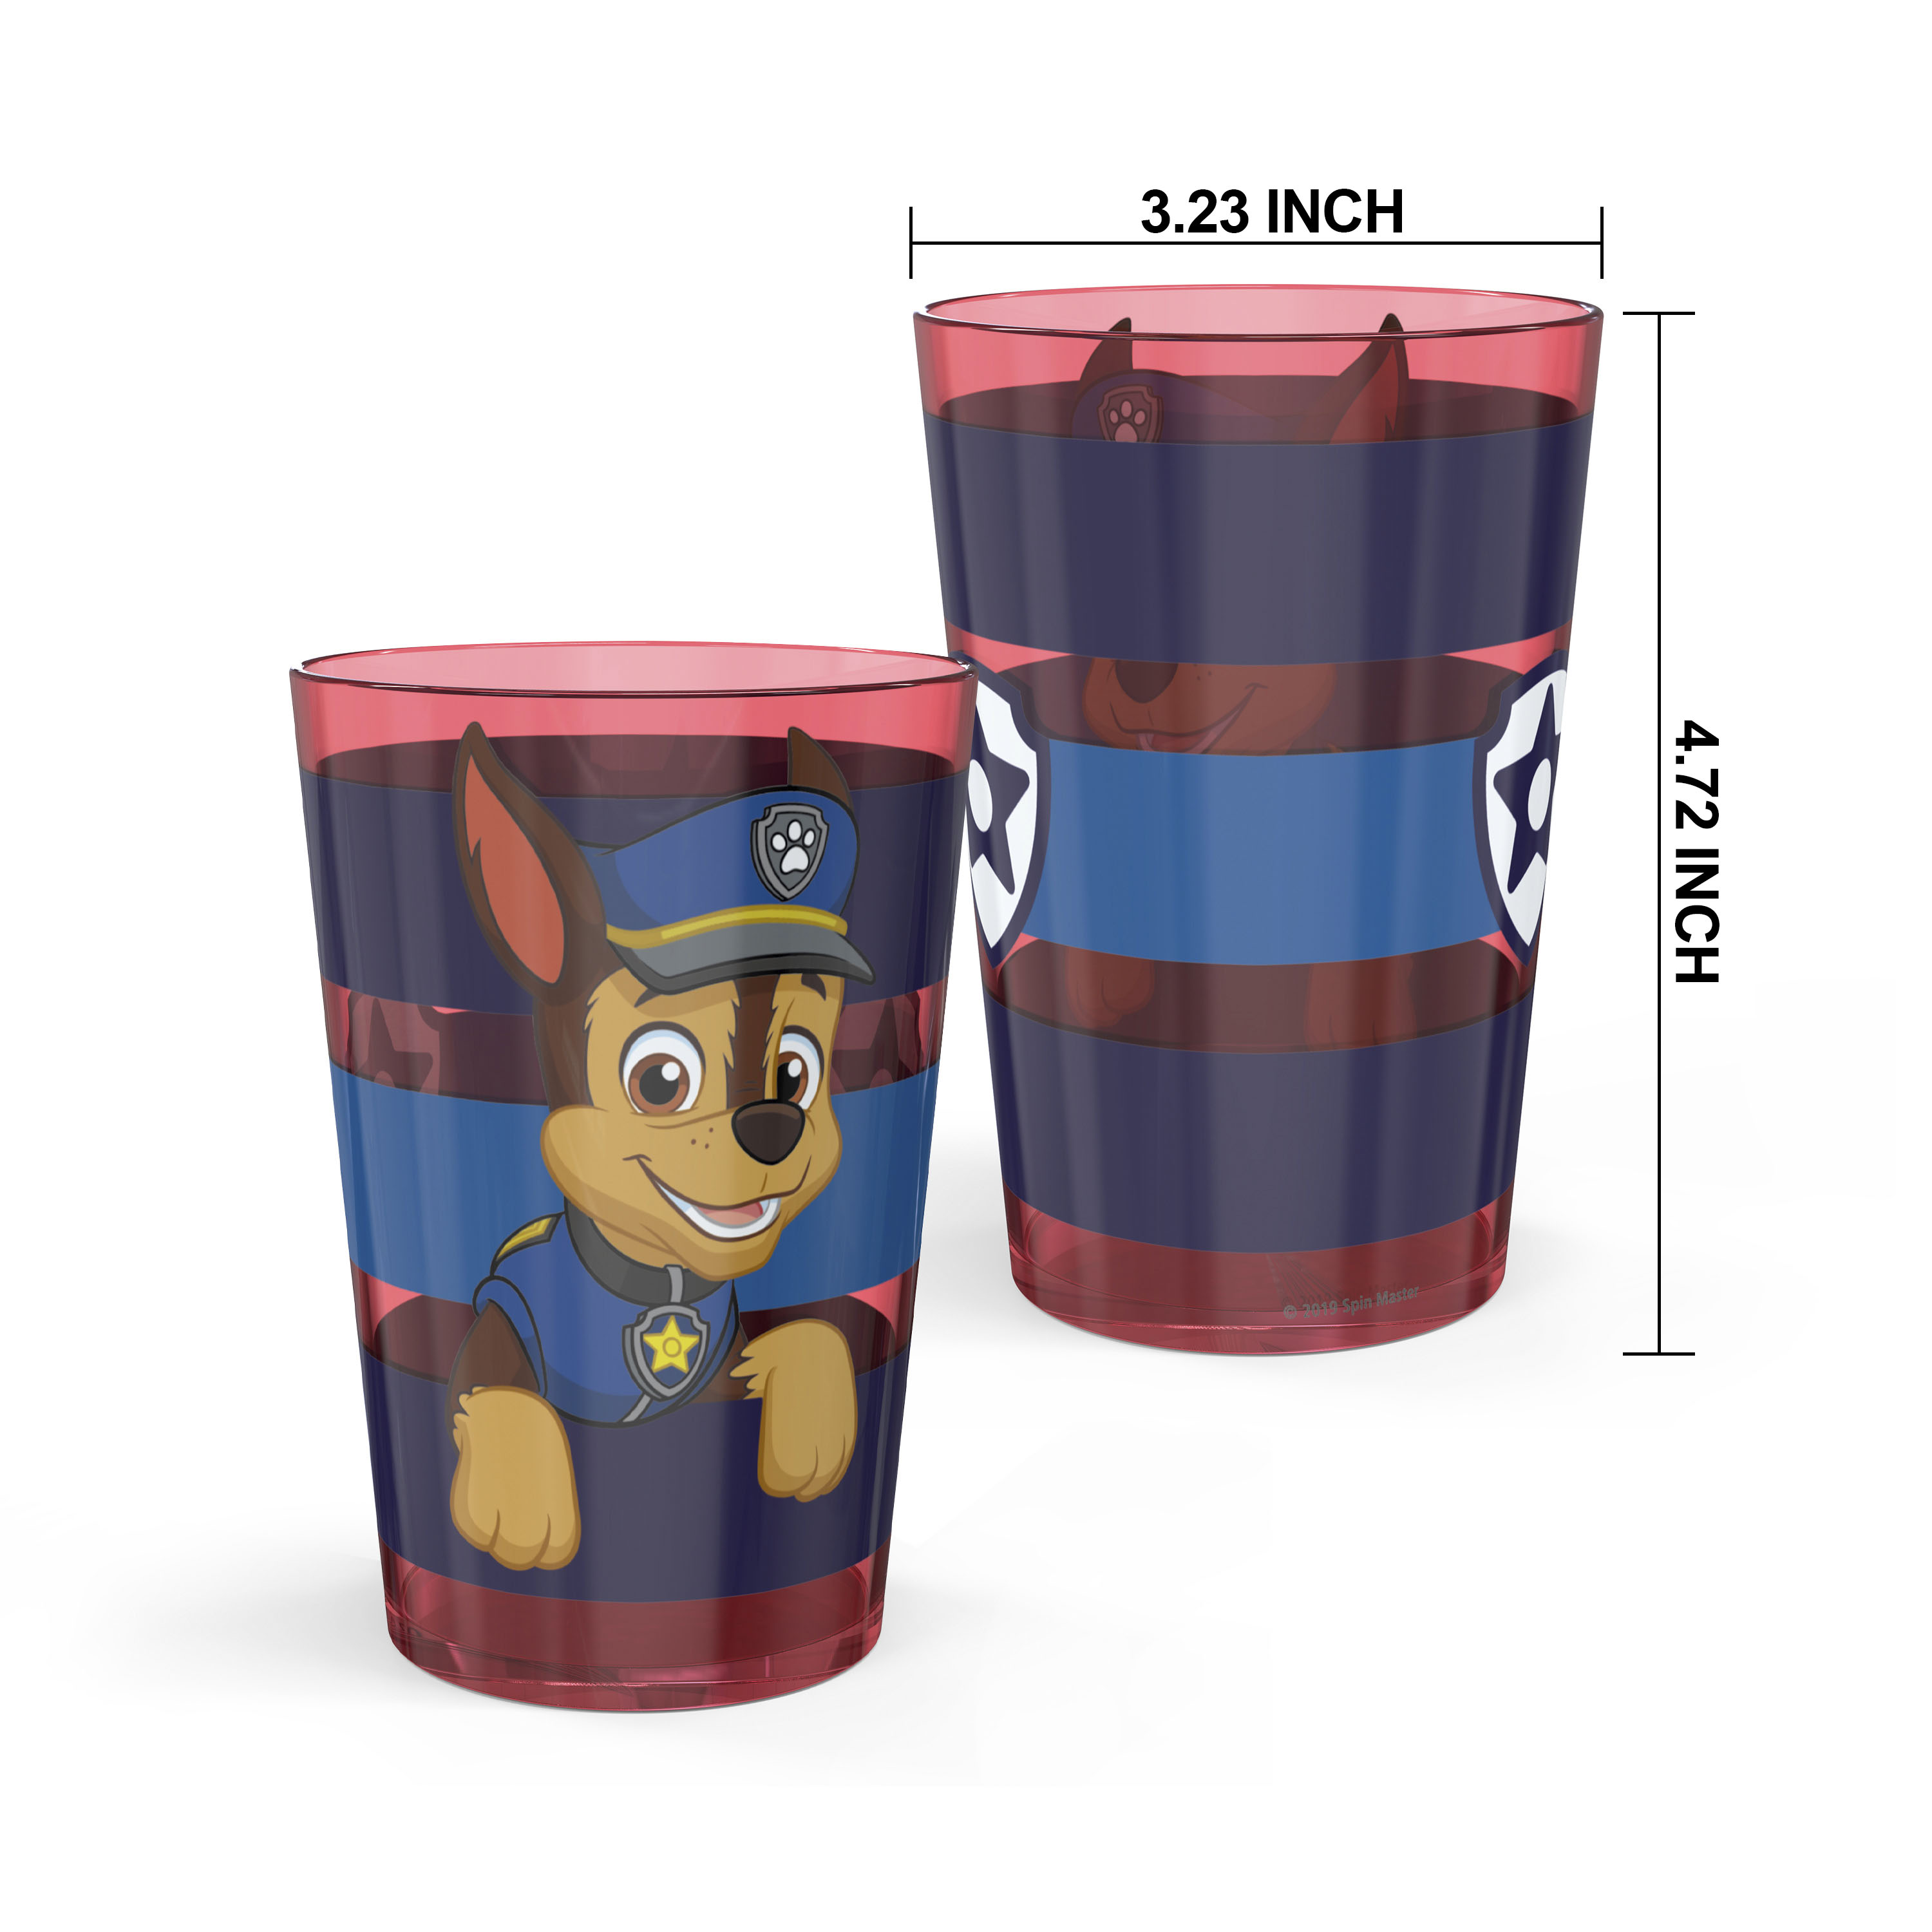 Paw Patrol 14.5 ounce Tumbler, Chase, Skye and Friends, 4-piece set slideshow image 9